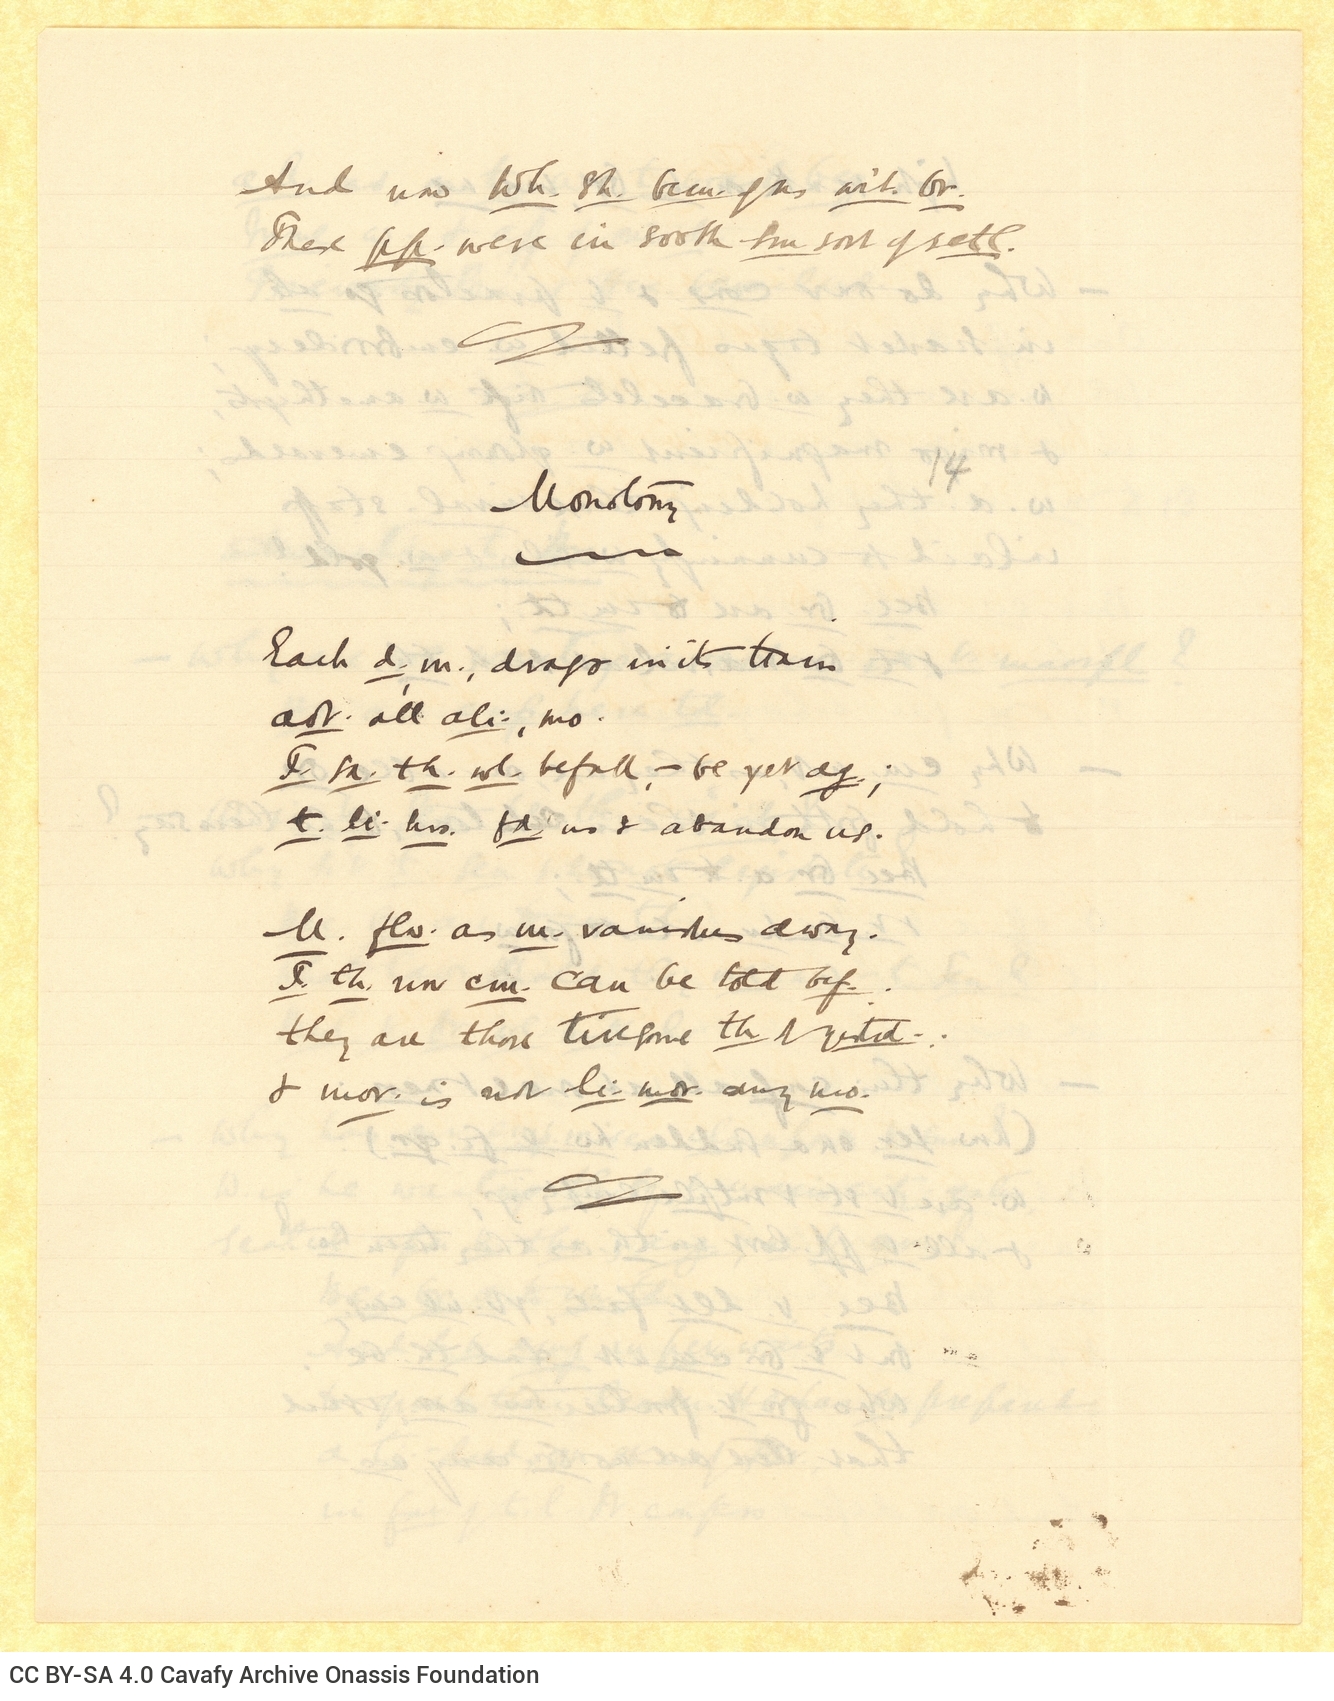 Handwritten text by Cavafy, including 21 poems of his translated into English ("An o[ld] man", "Candles", "Voices", etc.) 